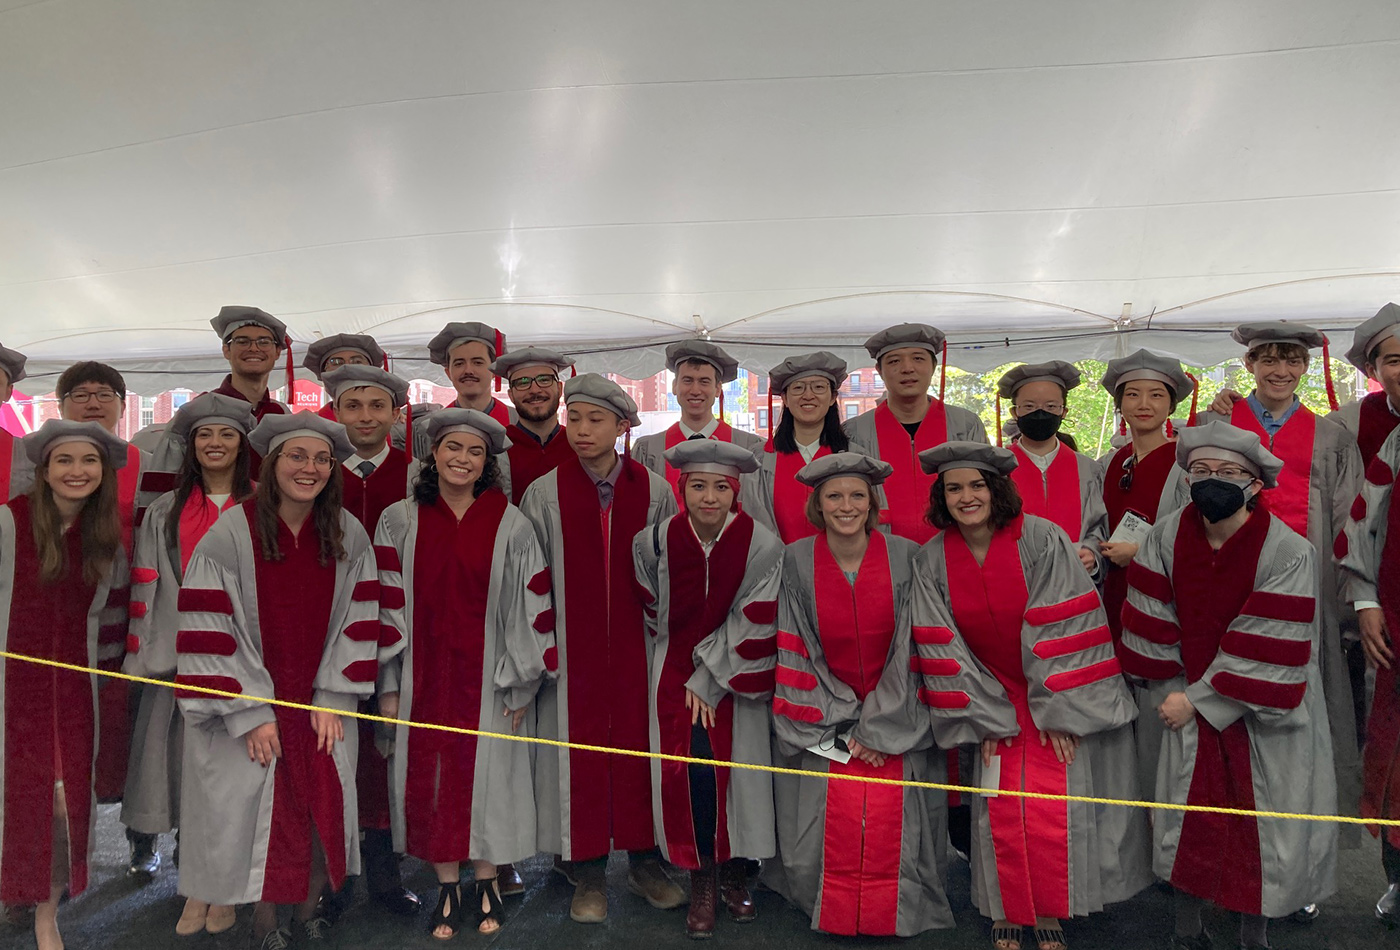 A group of graduates gather in their grey and maroon graduation regalia.